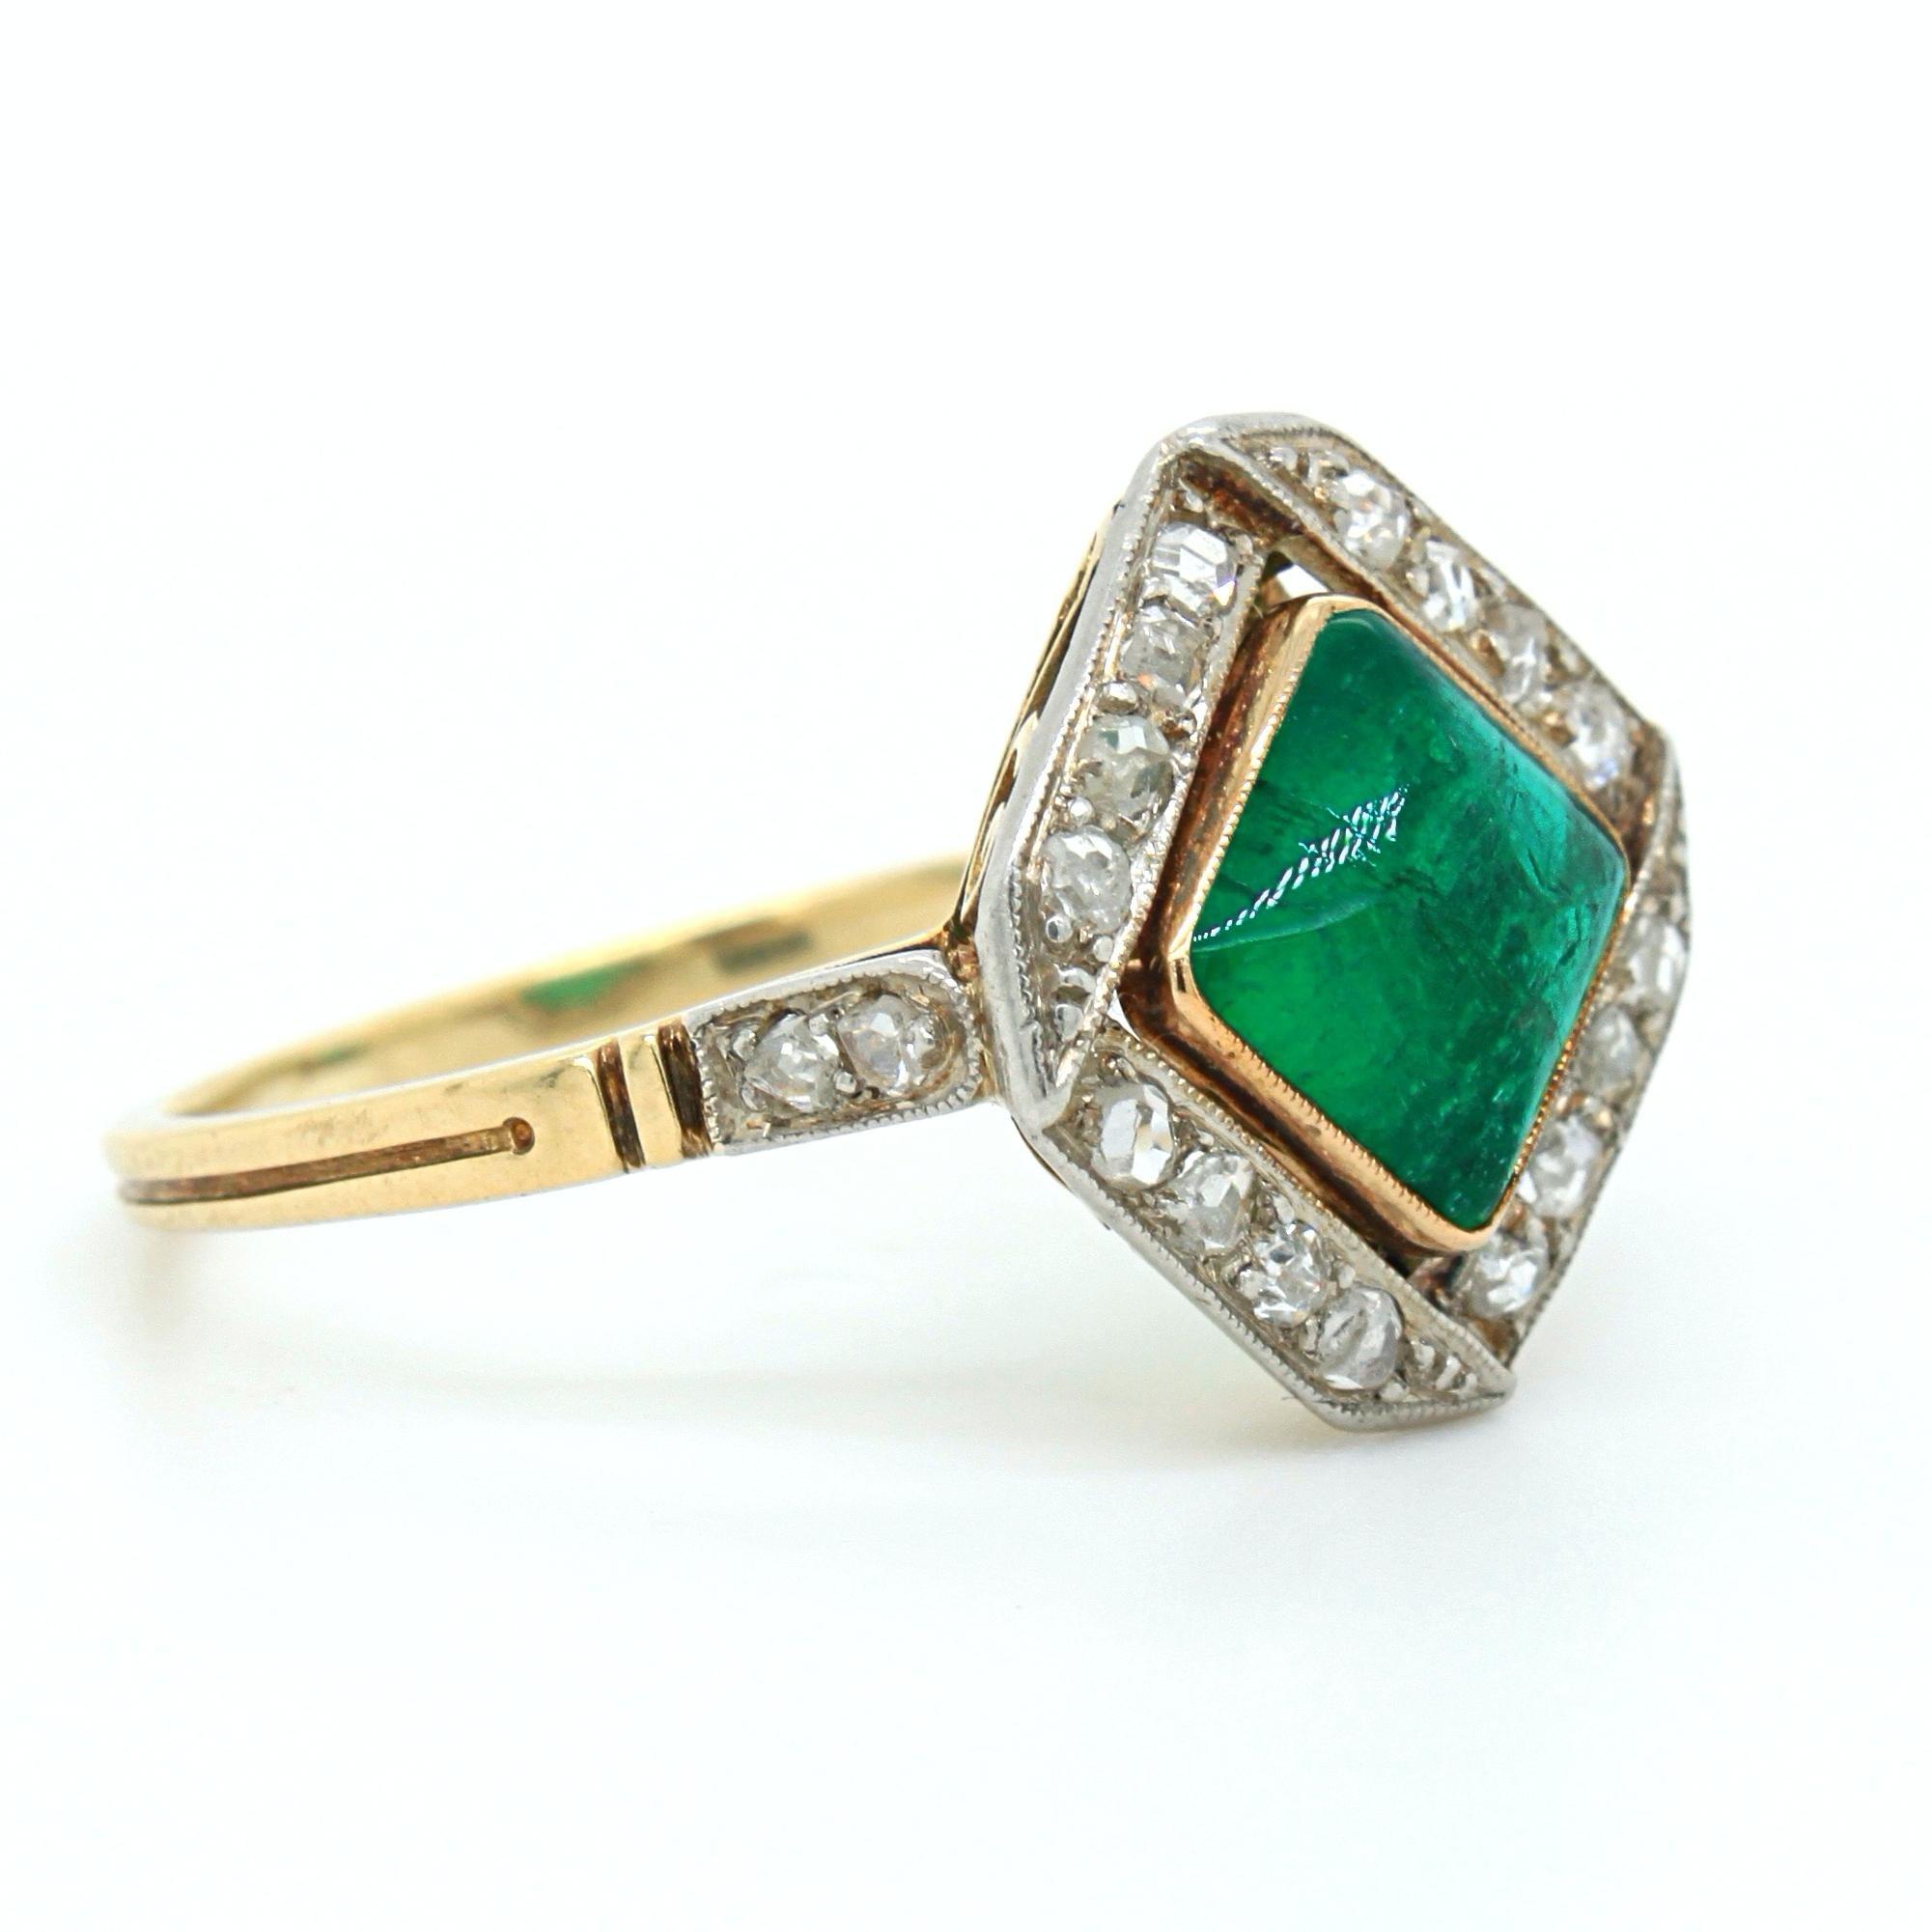 An emerald sugarloaf and diamond ring, Edwardian, ca. 1900s. The emerald is of Columbian origin and has a very attractive square sugarloaf shape, weighing approximately 2 carats. It is bezel set and affixed from the bottom, which allows the centre